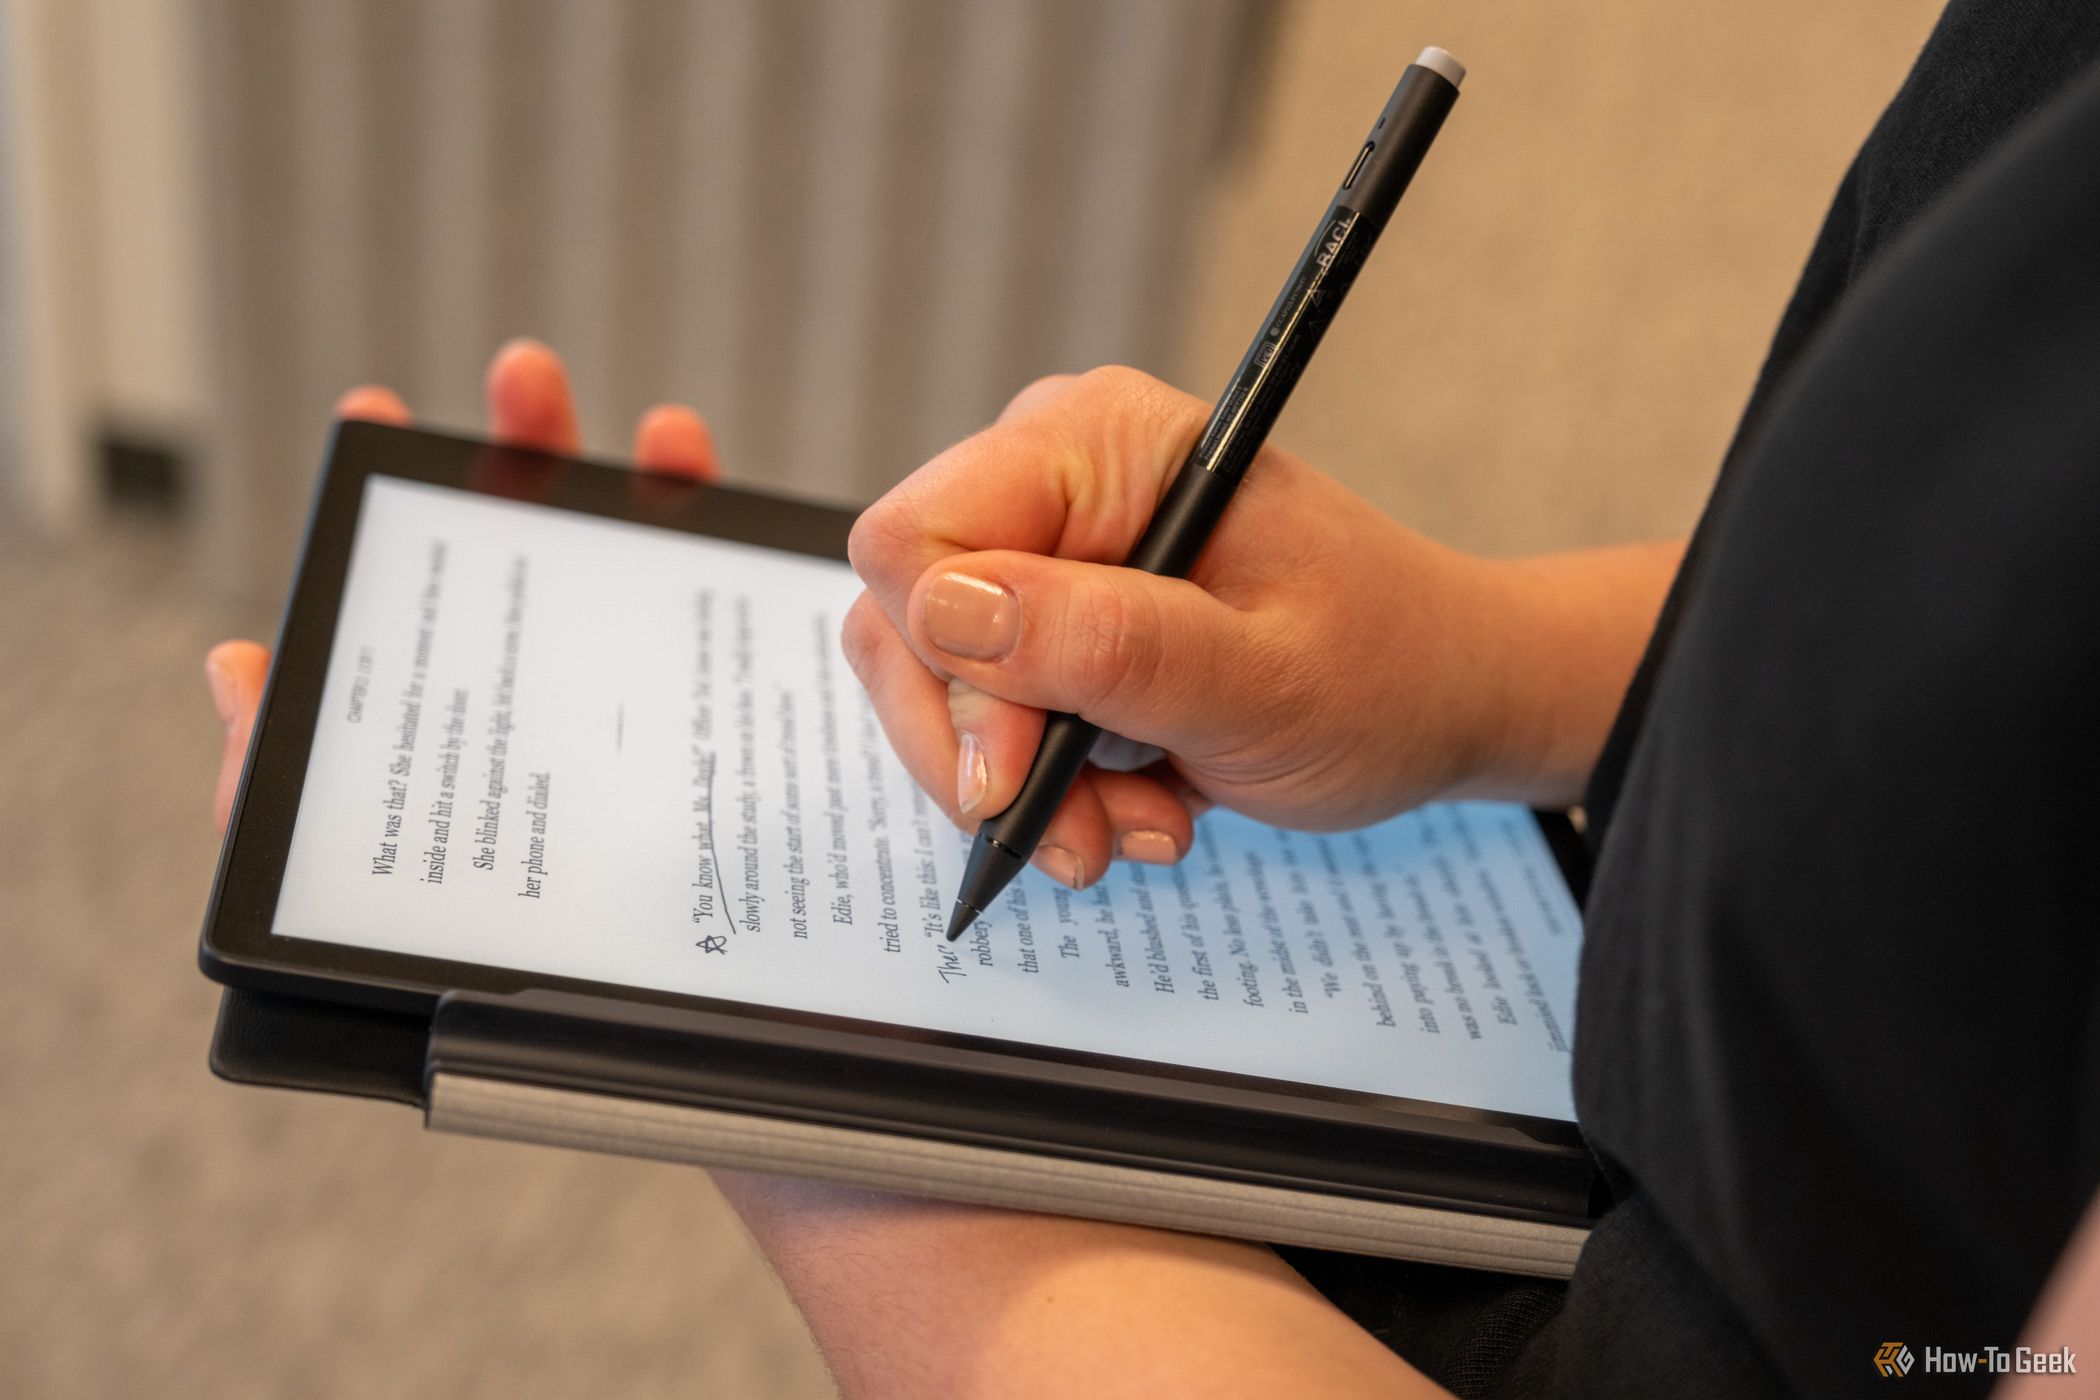 The Kobo Elipsa 2E in a person's hands while taking notes.